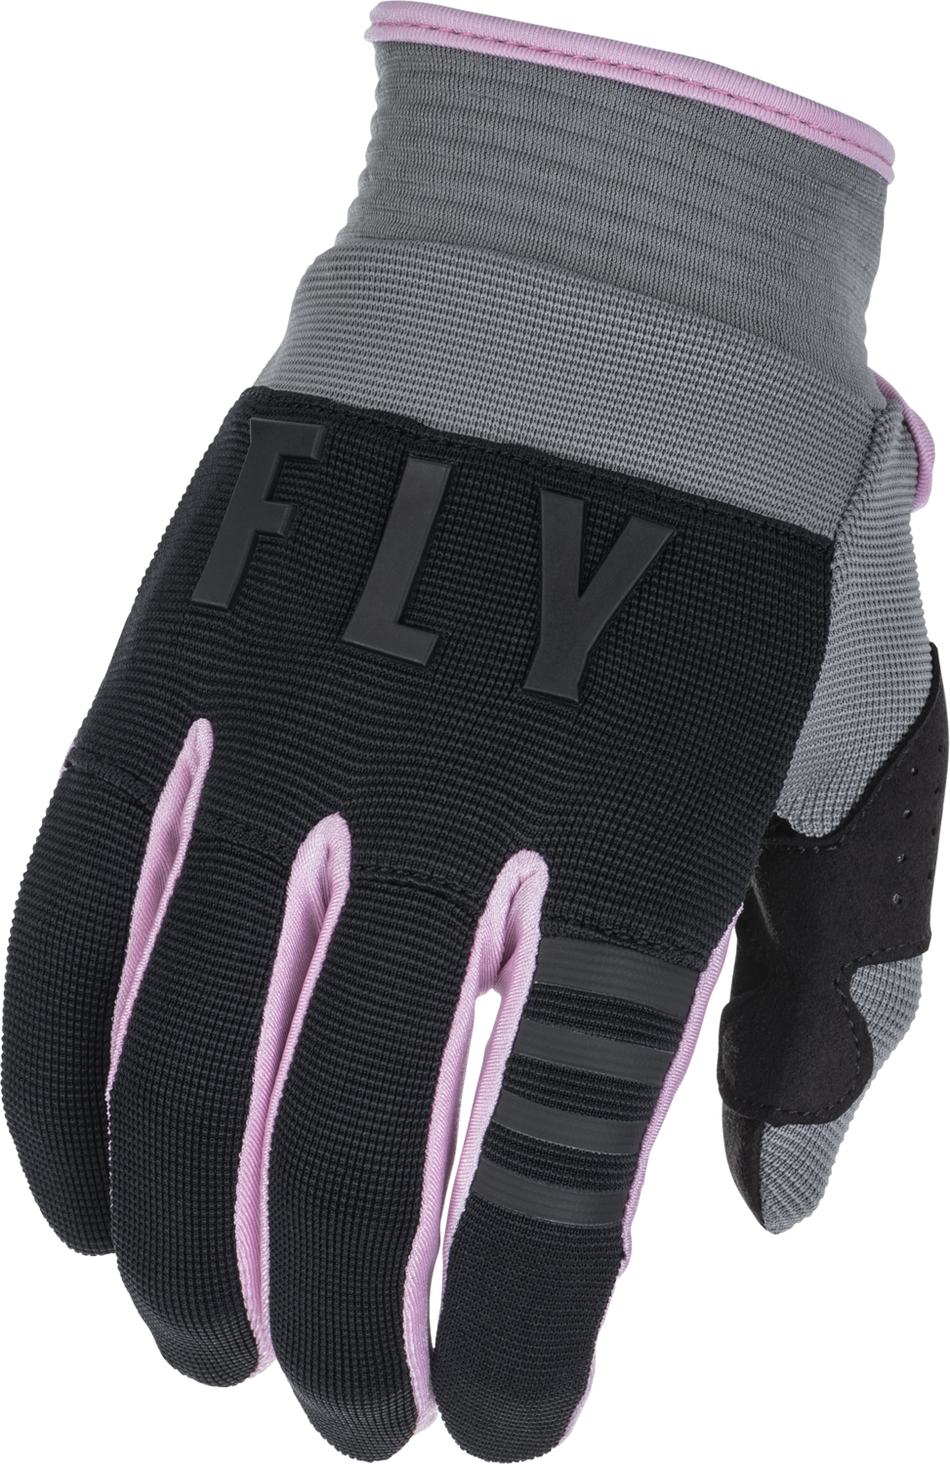 FLY RACING F-16 Gloves Grey/Black/Pink Sm 375-811S